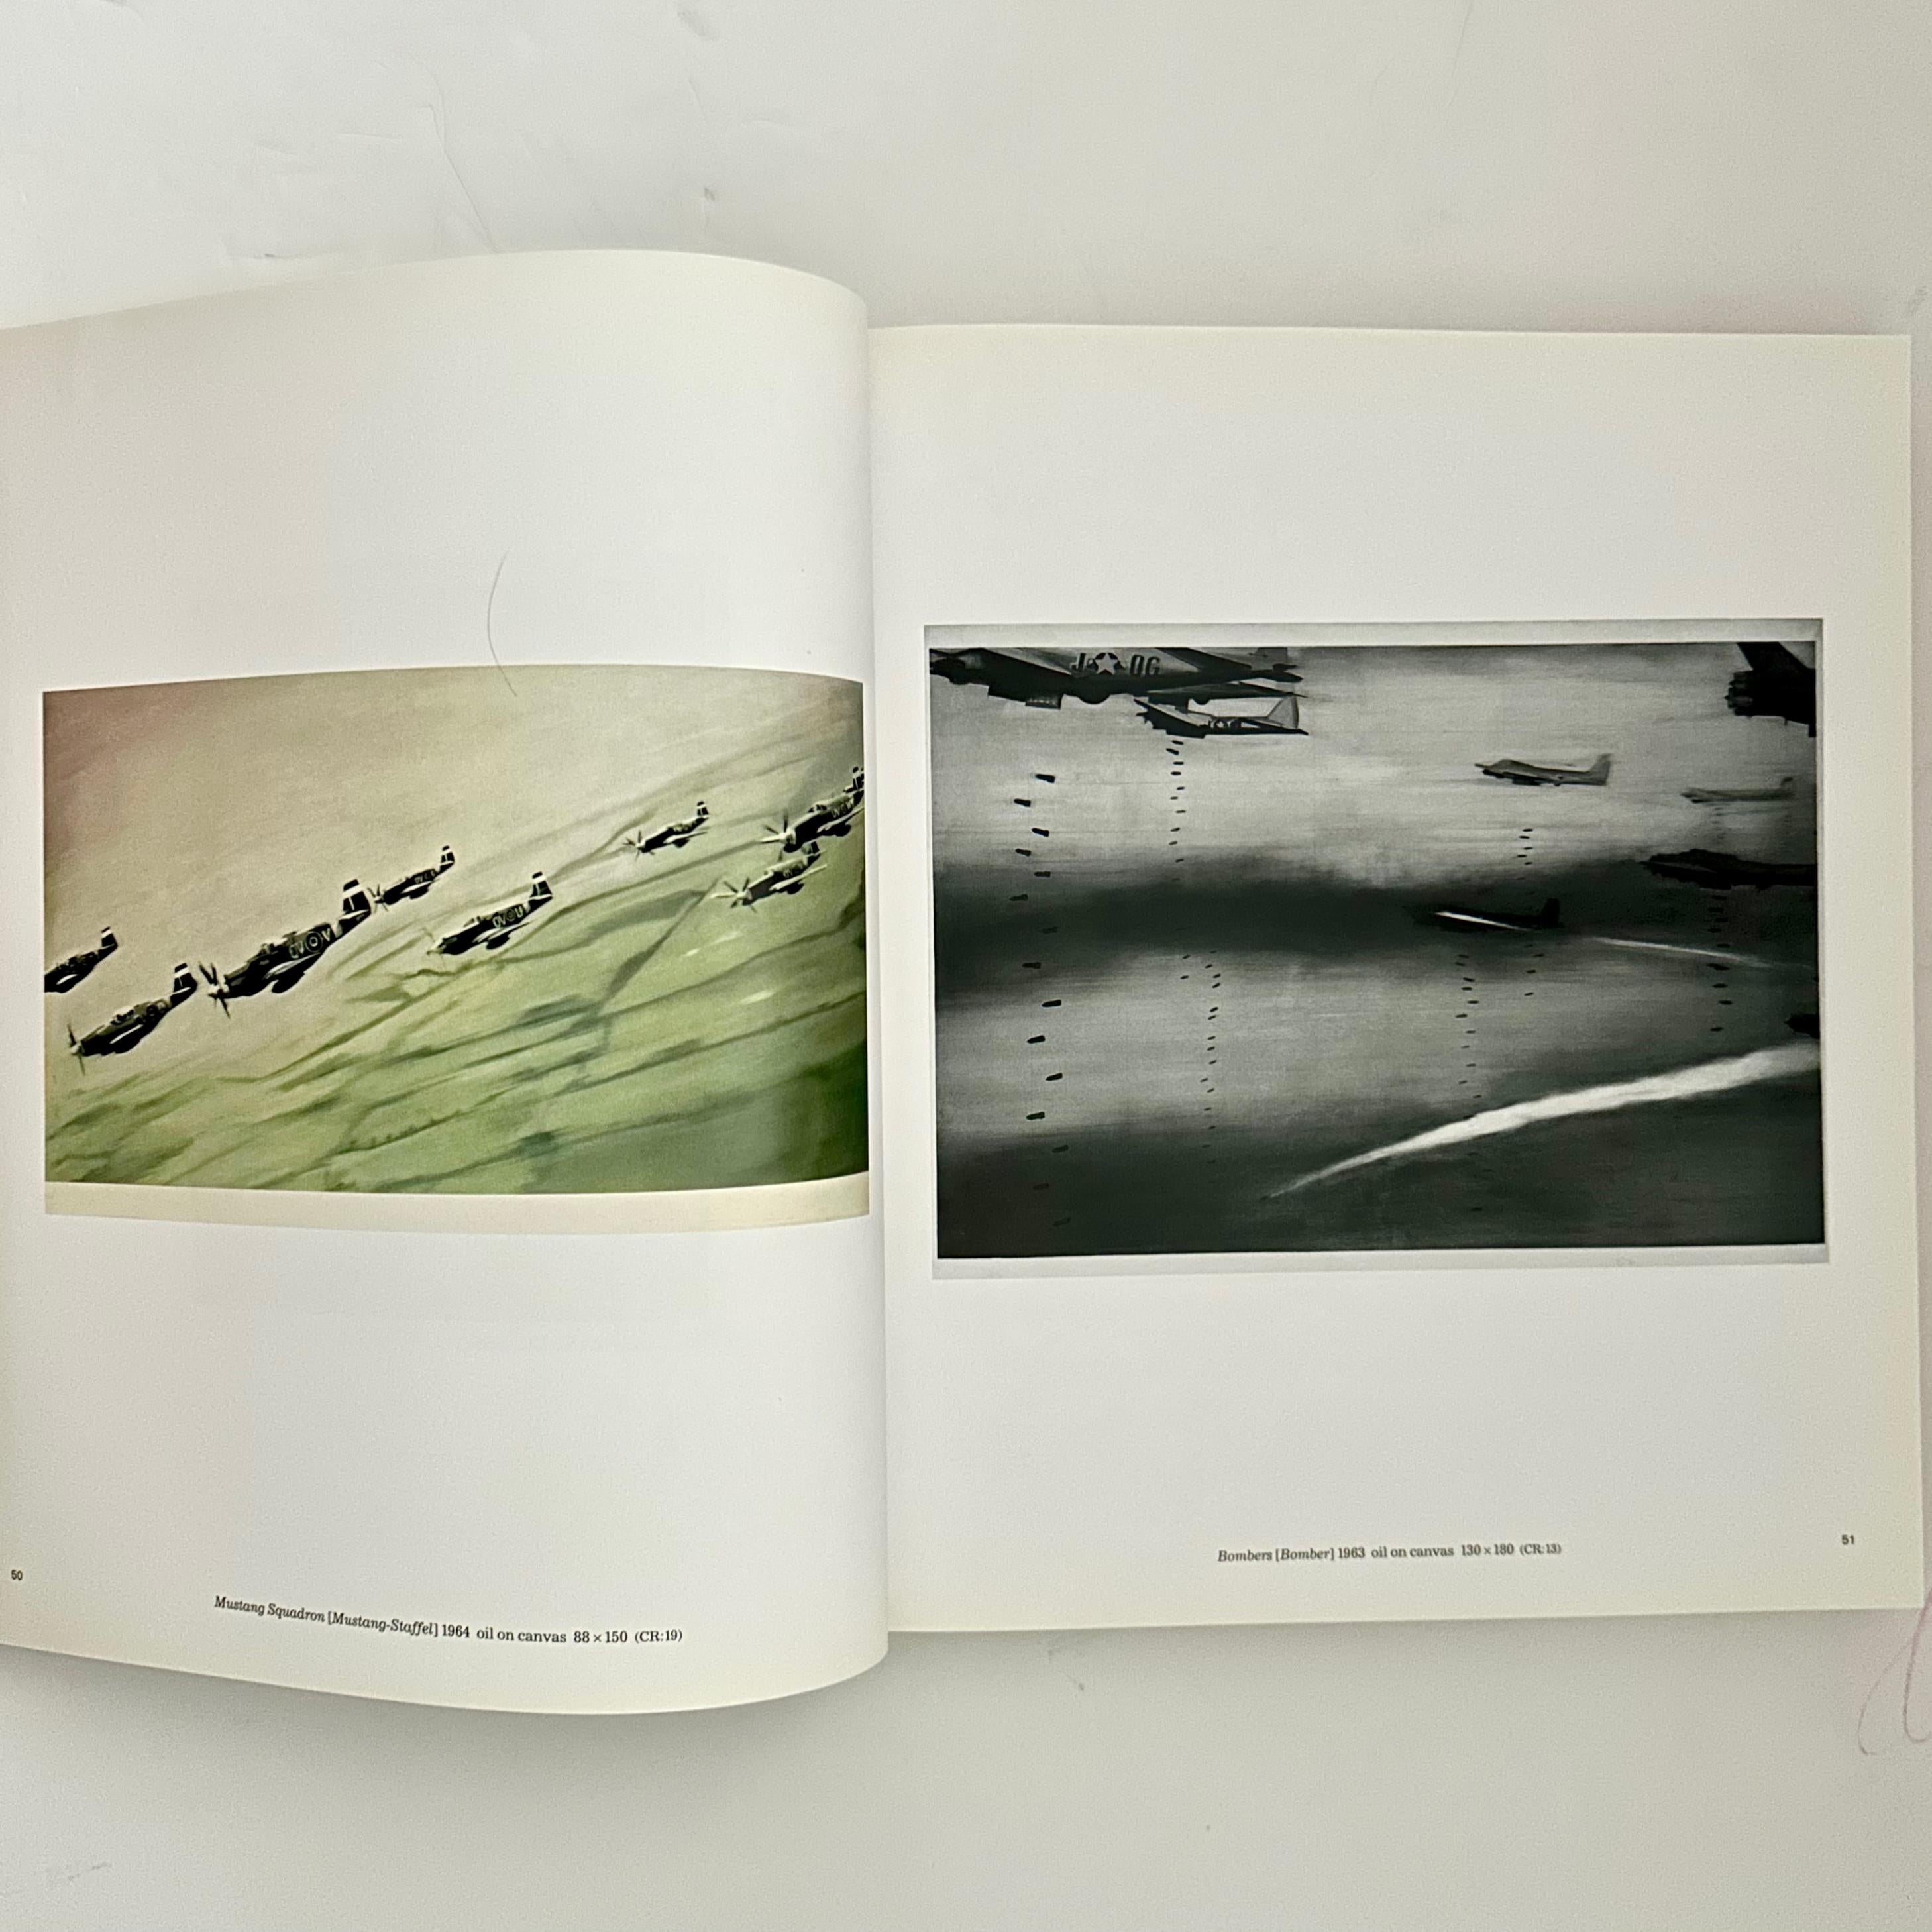 Published by Tate Modern, 1st edition, London, 2011. Softcover, English text.

“Art is the highest form of hope.” - Gerhard Richter.

More than 300 colour and black and white plates. 

The first and most complete overview of Richter's whole career